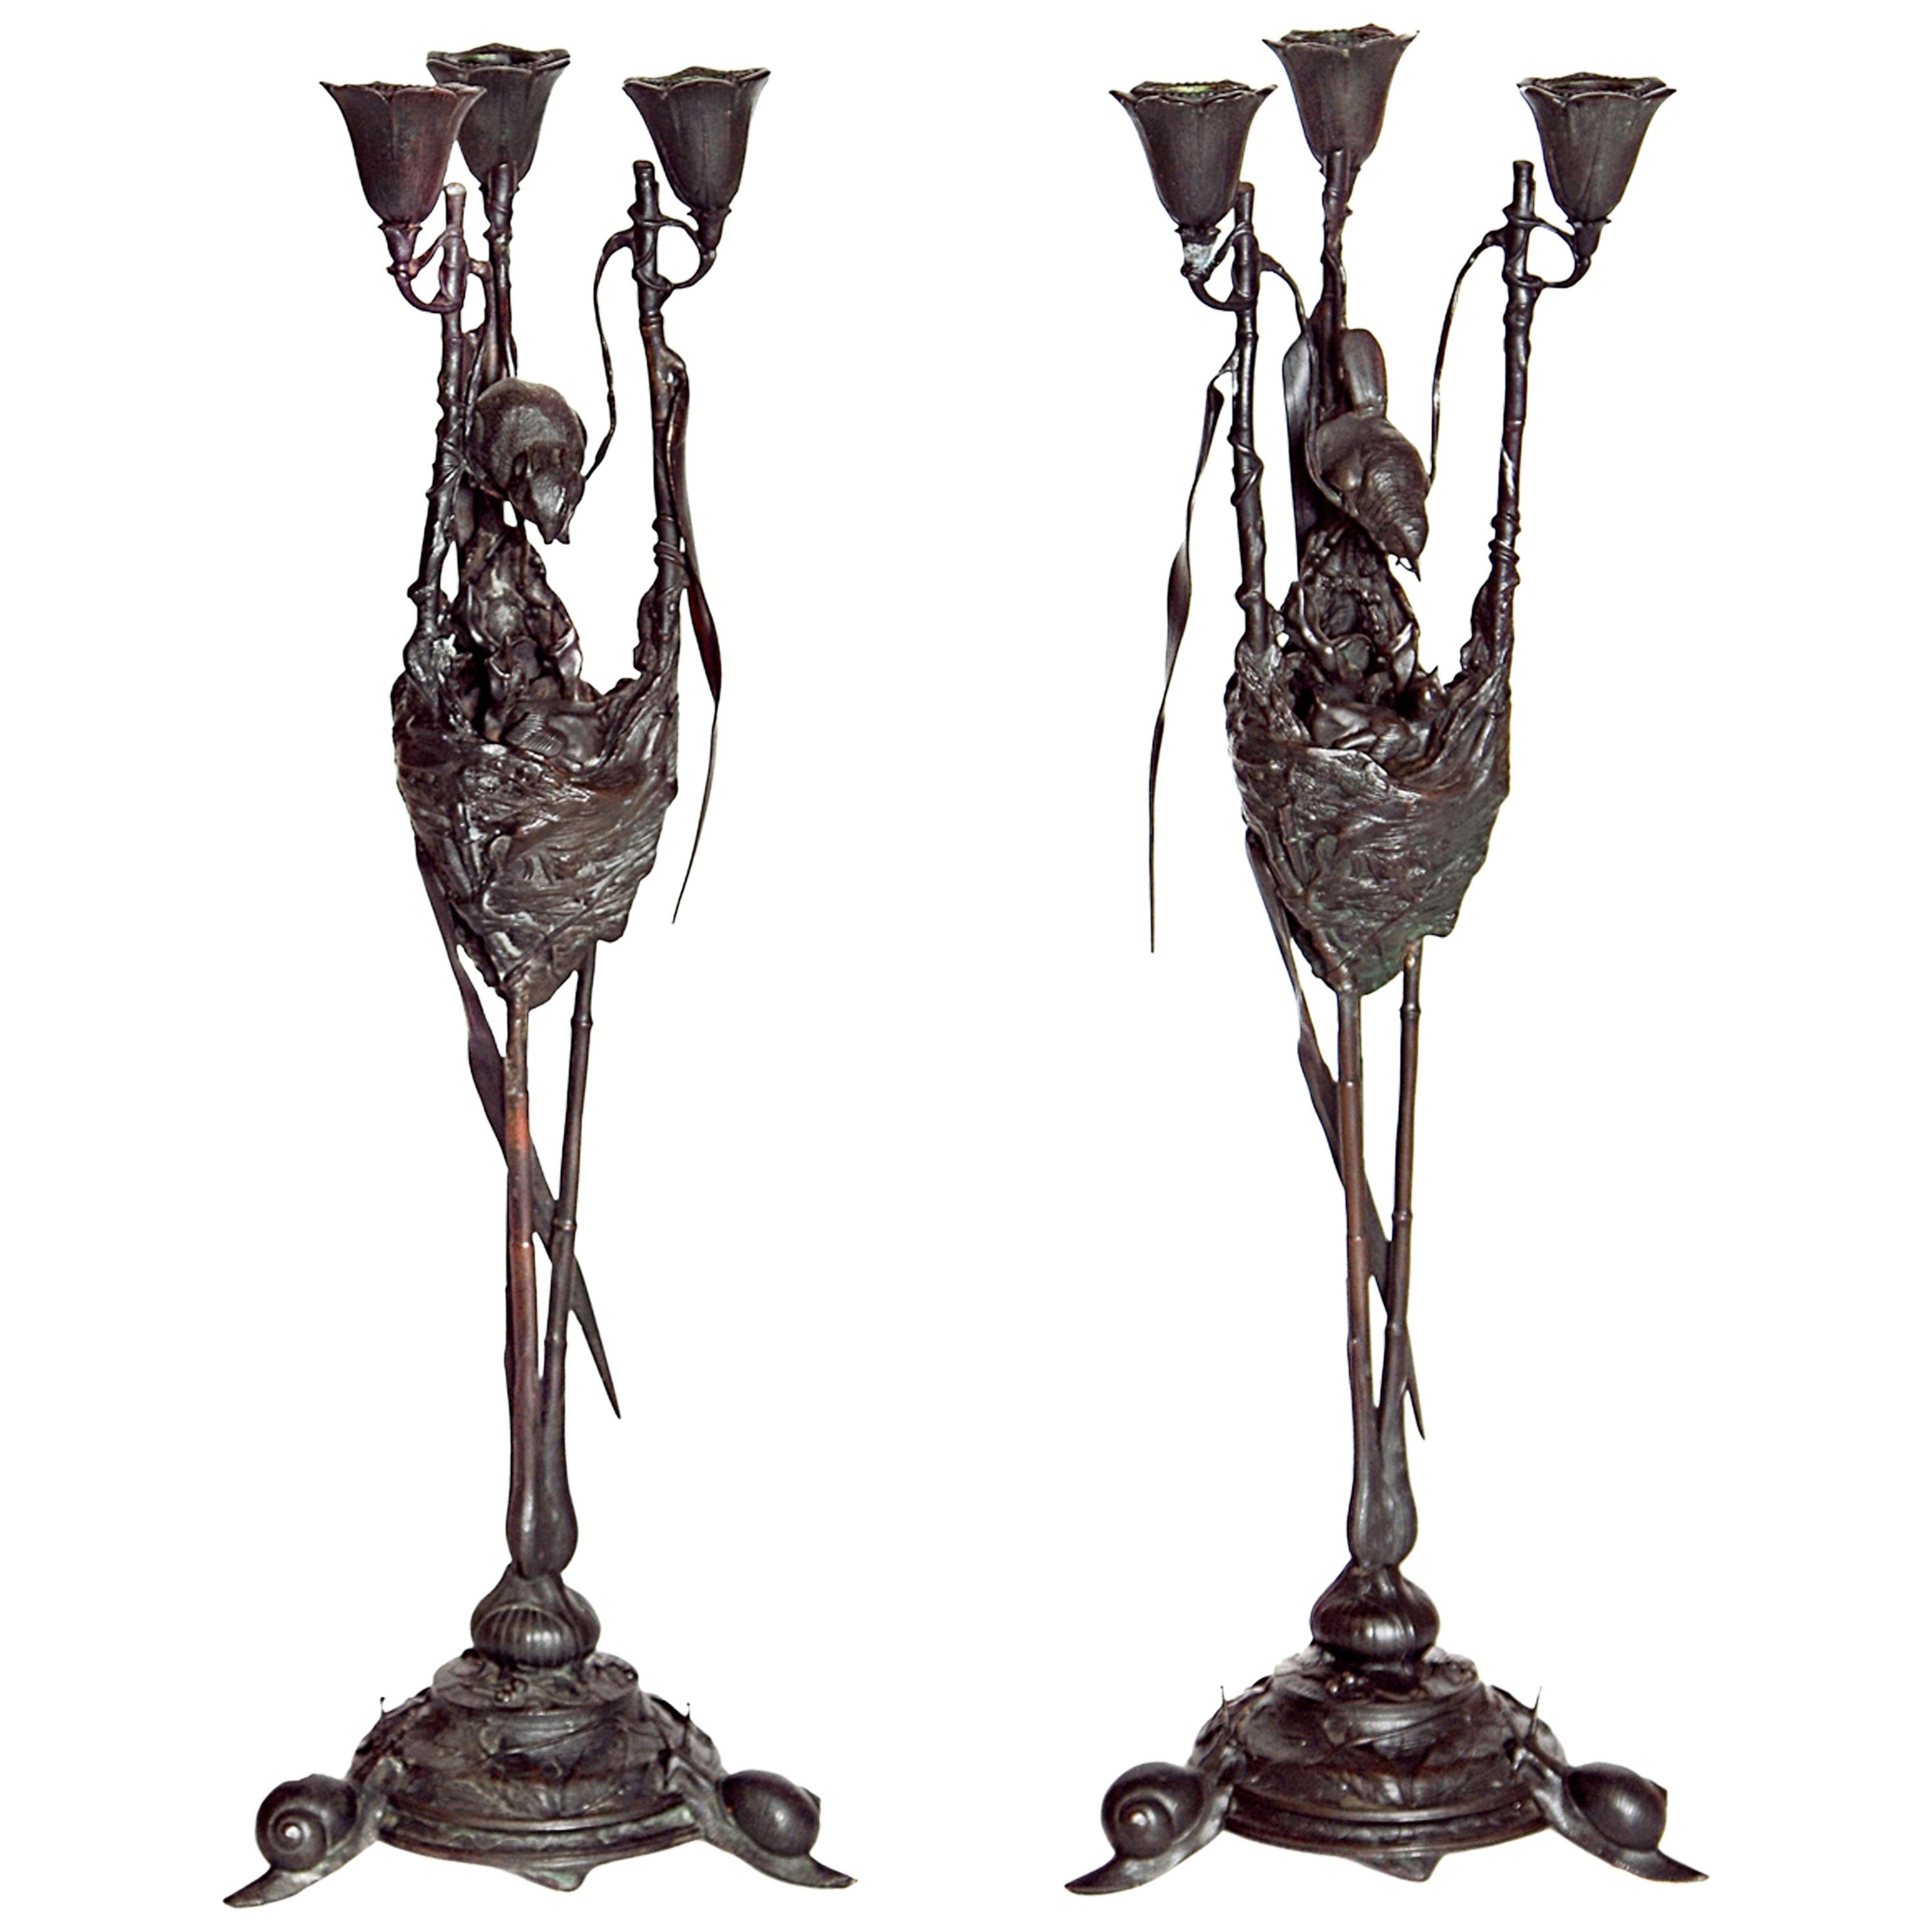 Auguste-Nicolas Cain, Pair of French Candelabra with Bird's Nest